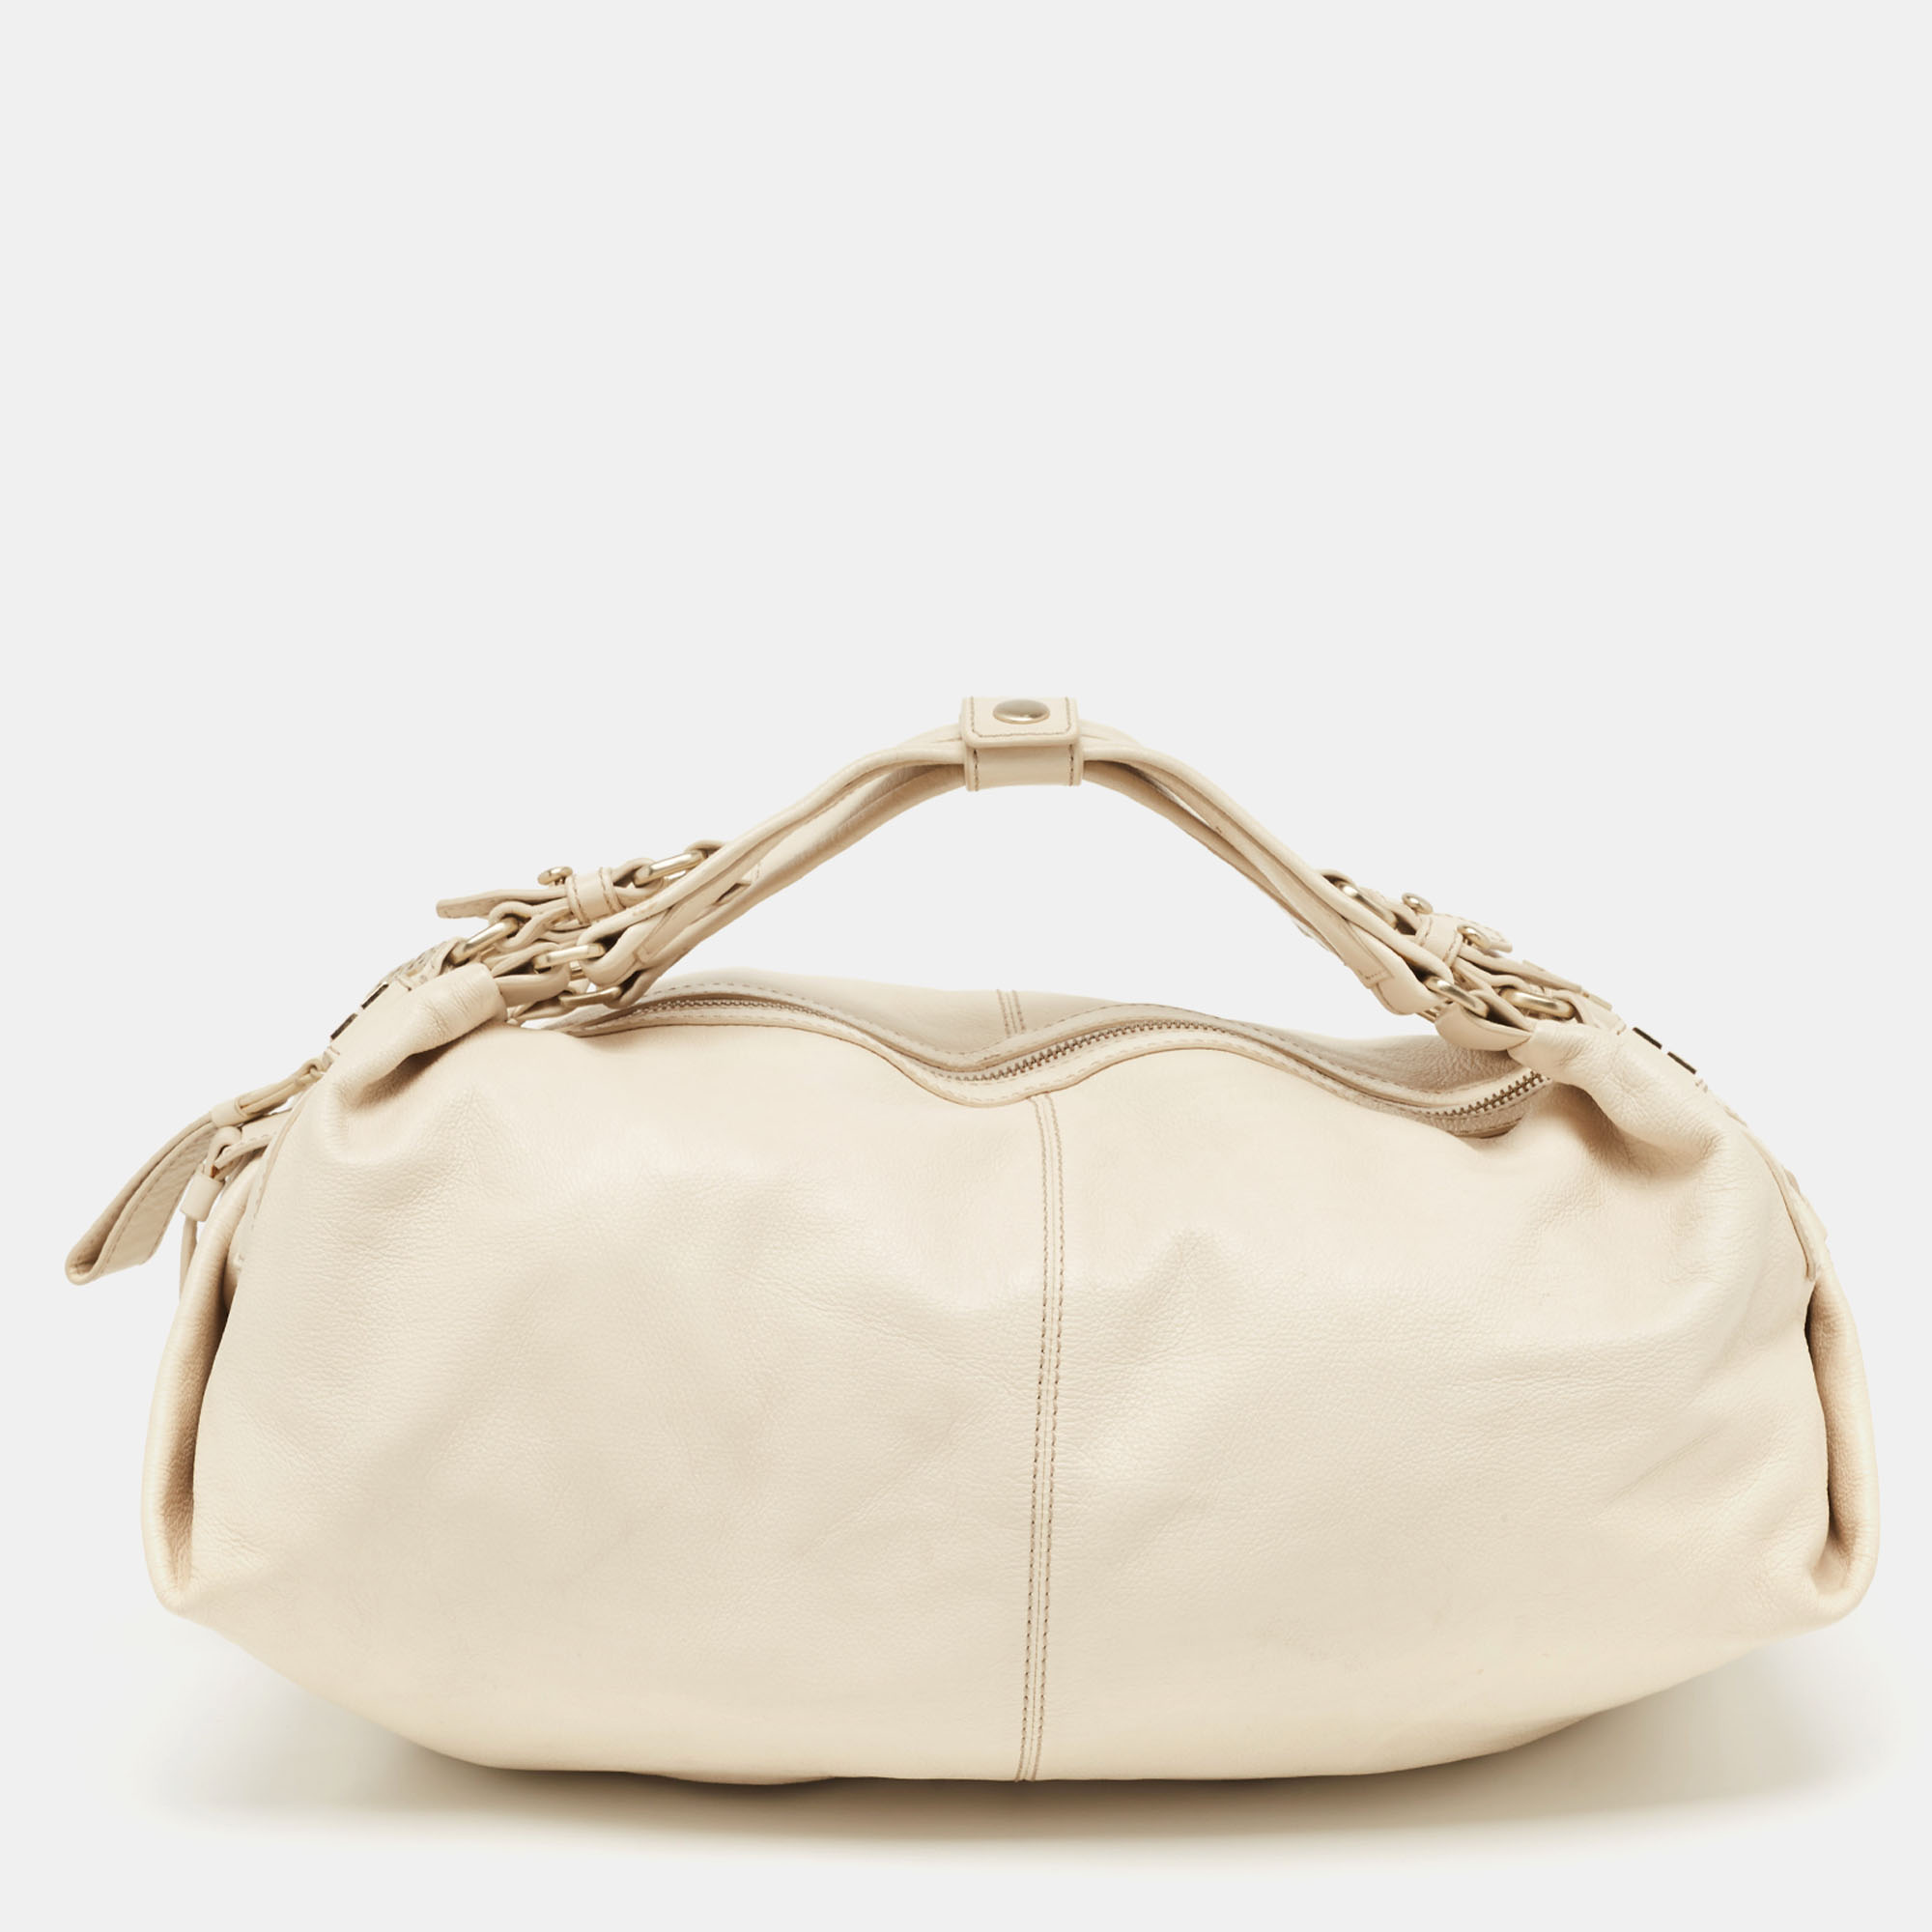 Givenchy light beige leather double handle hobo